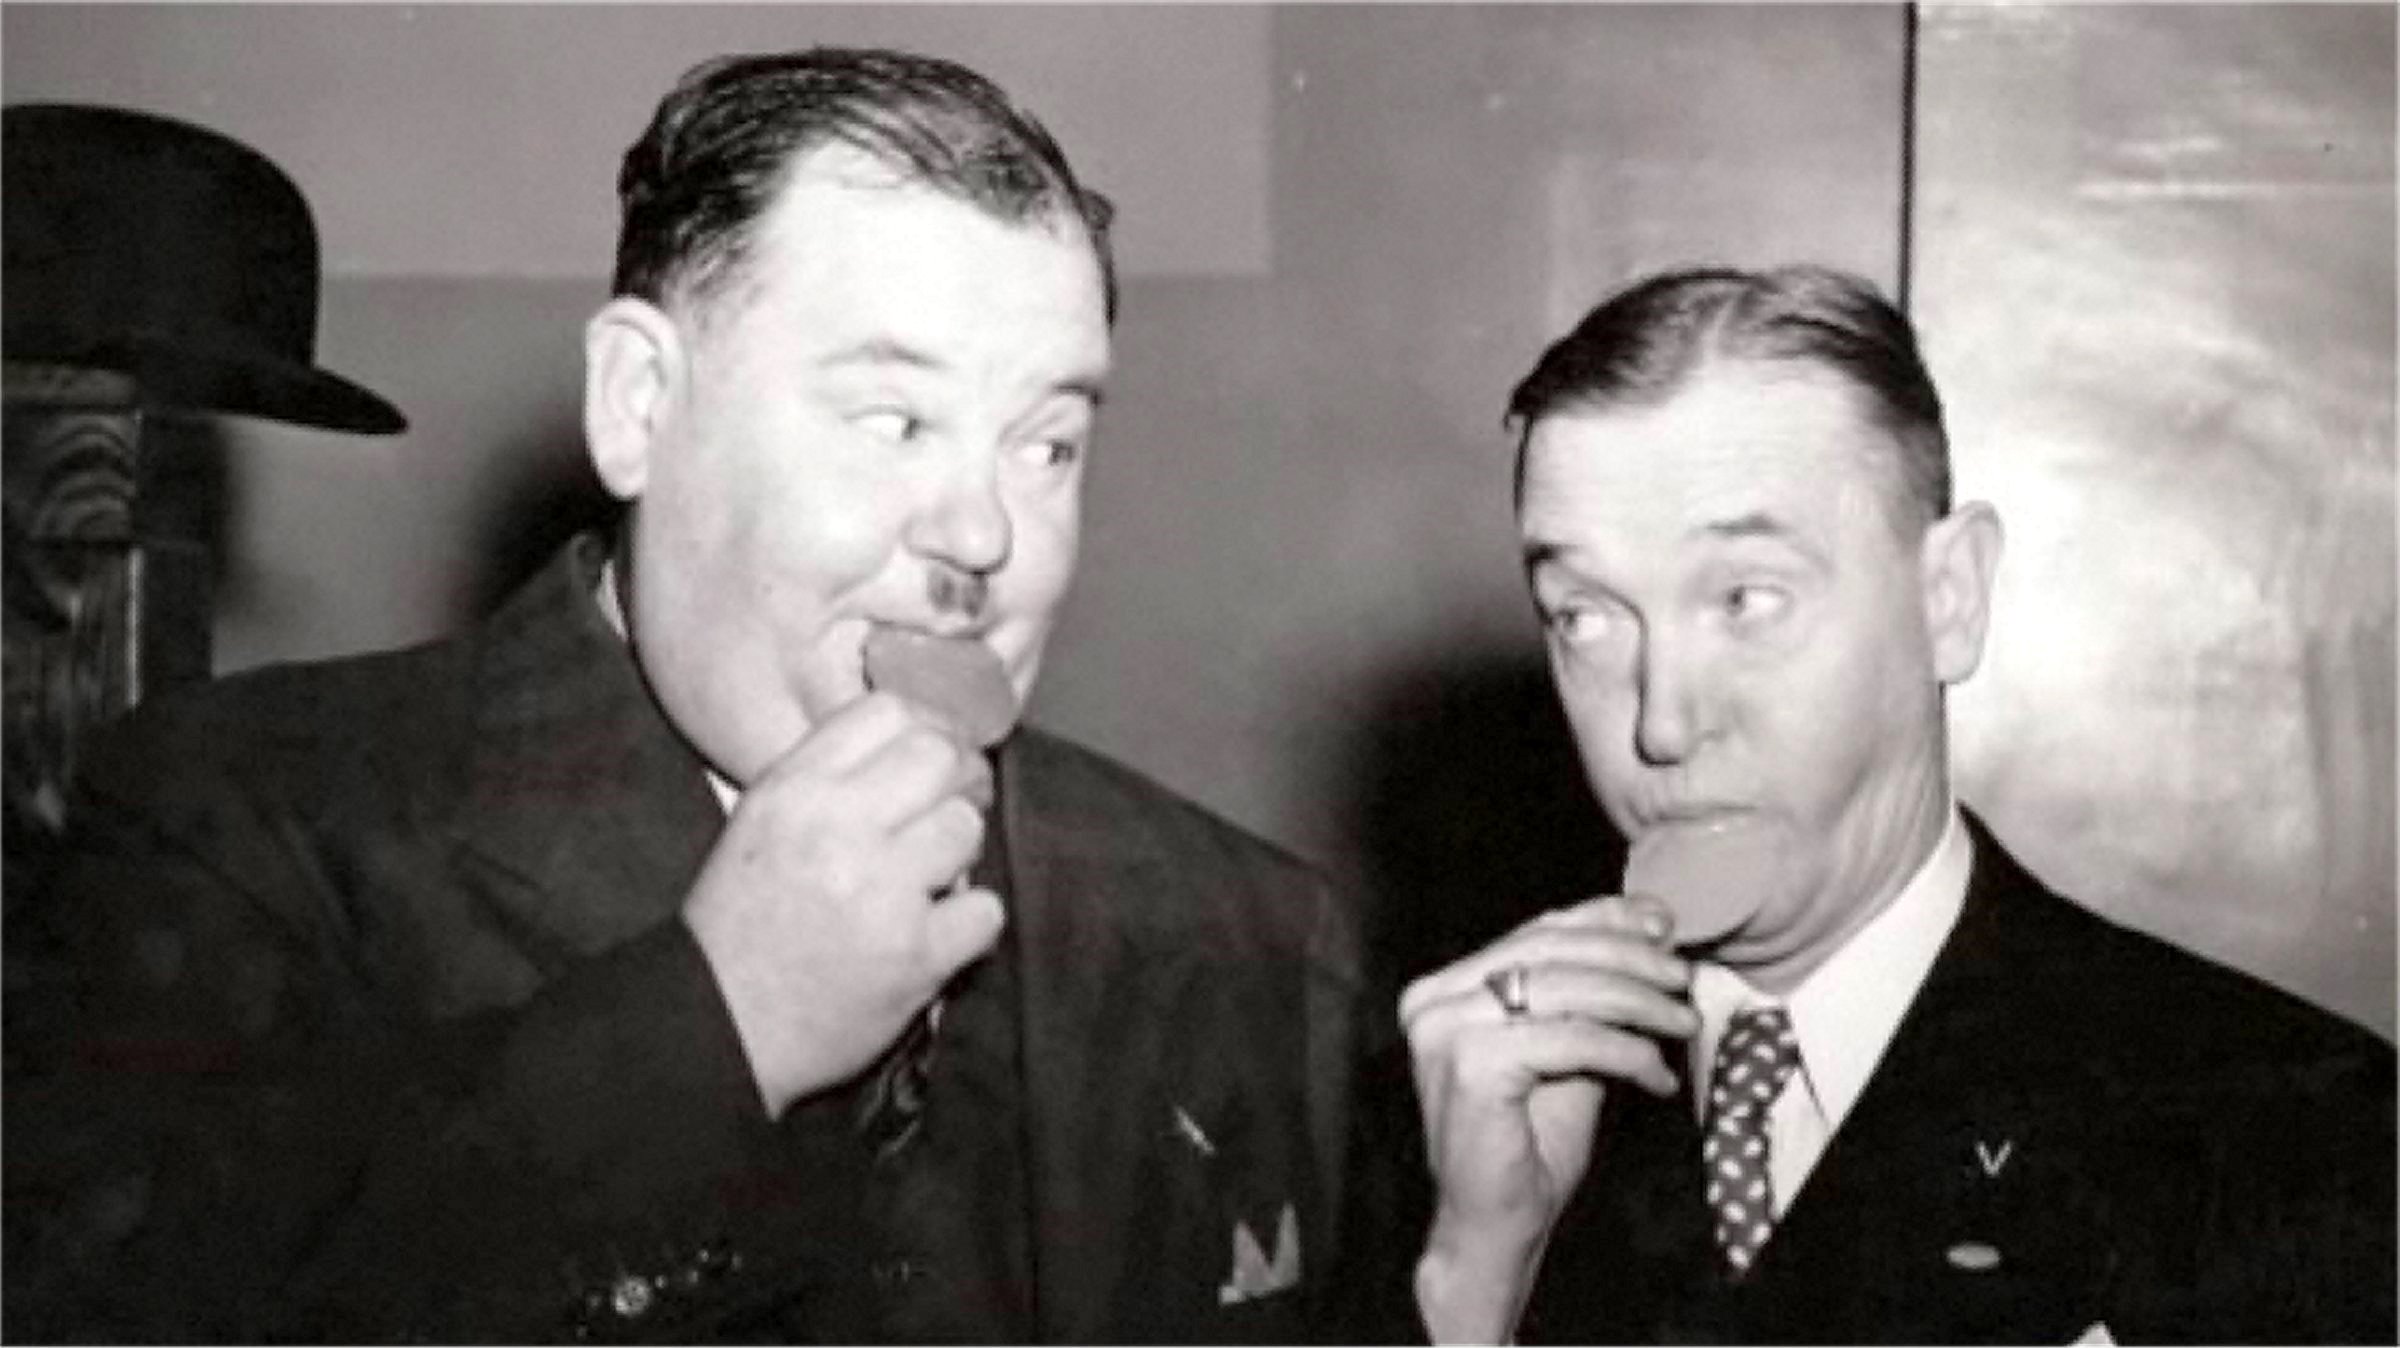 HOLLYWOOD VICTORY CARAVAN Laurel and Hardy by A.J Marriot.